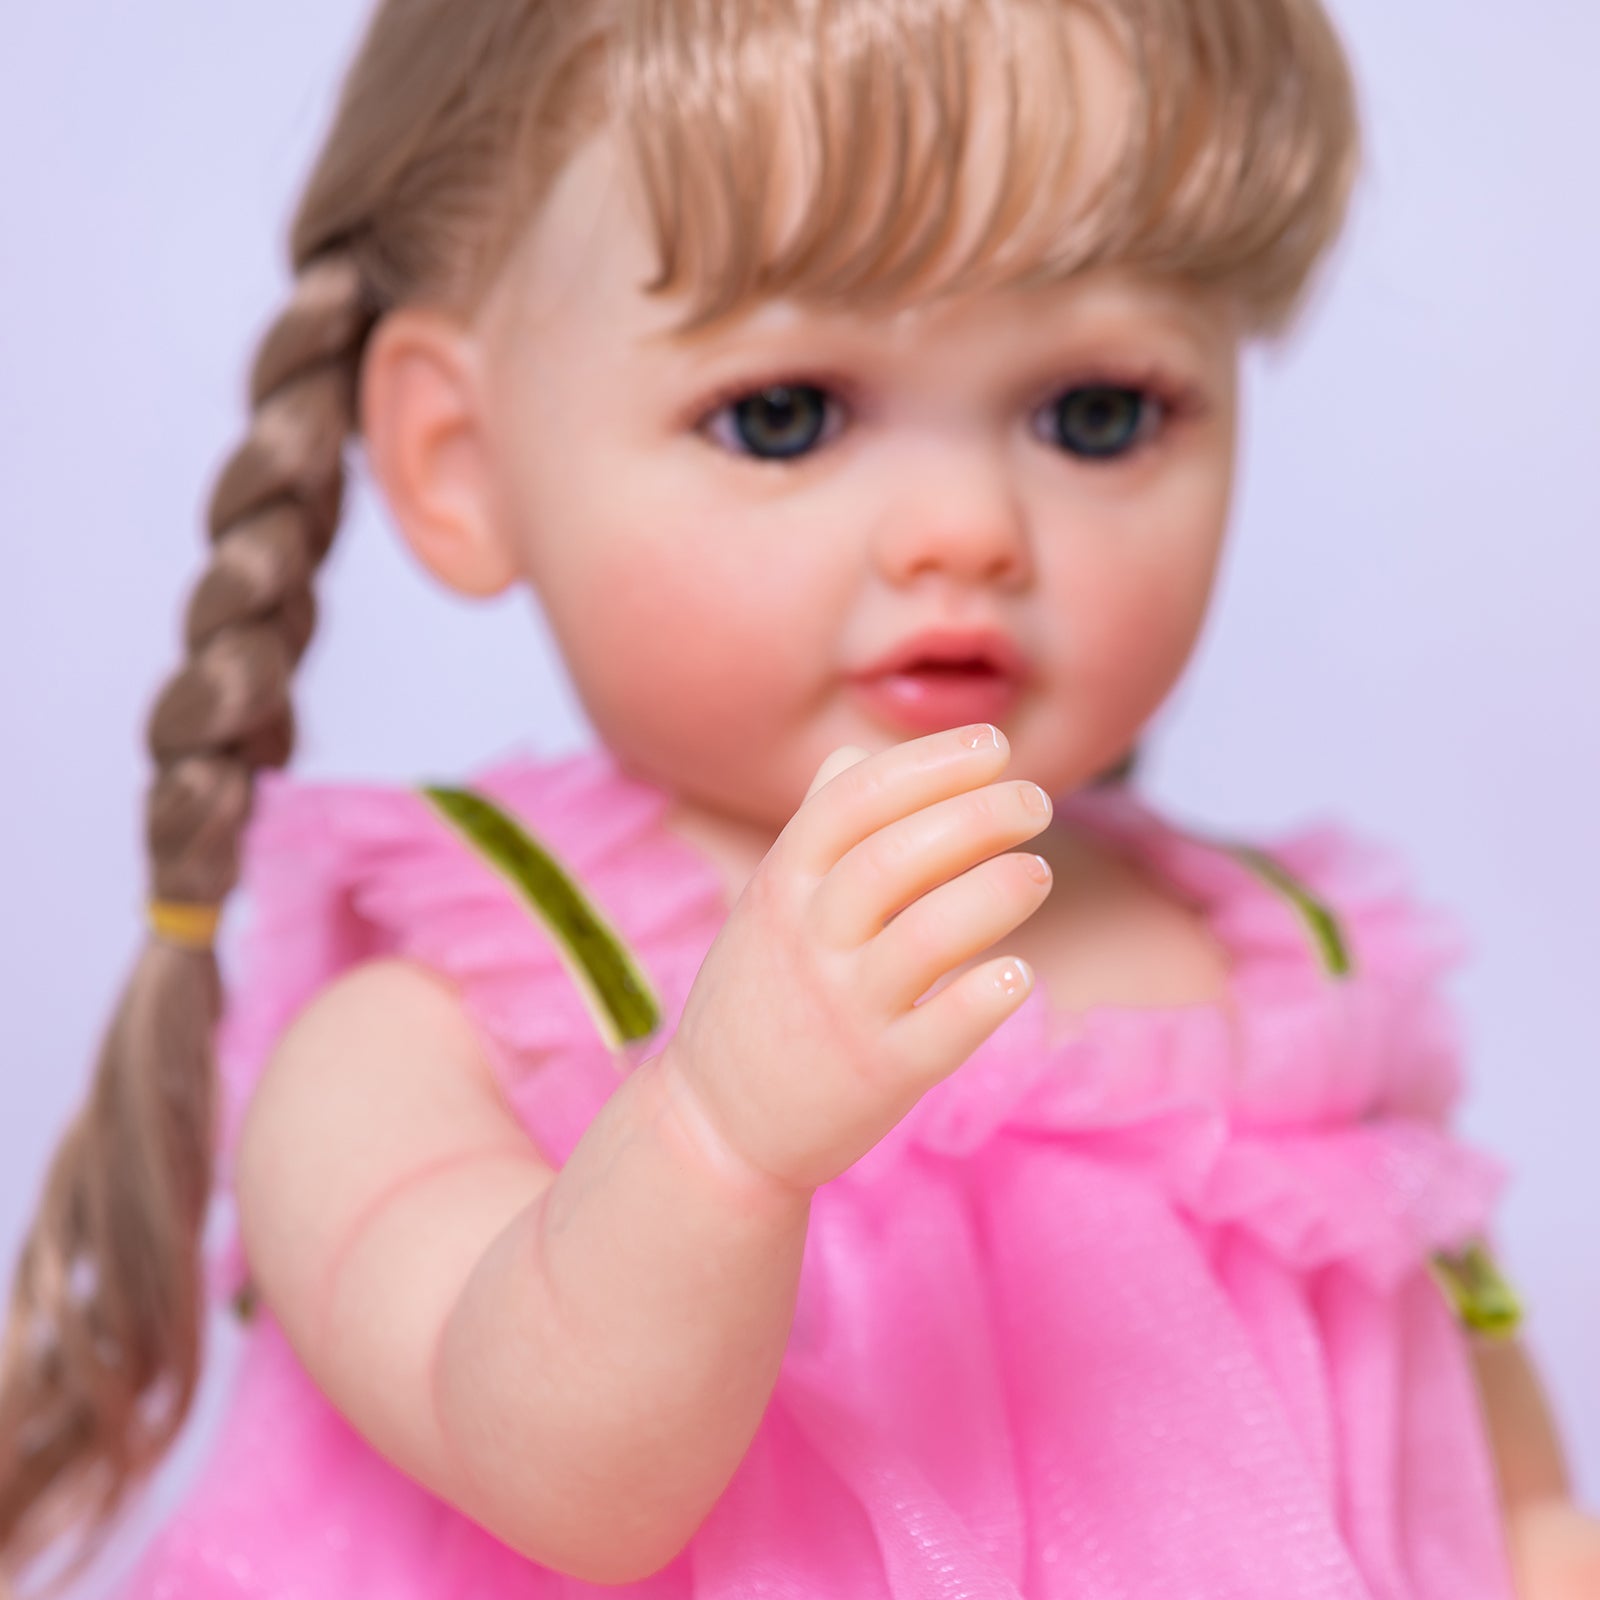 Beautiful Blonde Long Hair Princess Girls Lifelike Reborn Baby Dolls Silicone Full Body Girl 22 Inches 55CM Visible Veins Washable Realistic Newborn Babies Doll Toys For Ages 3+ Children